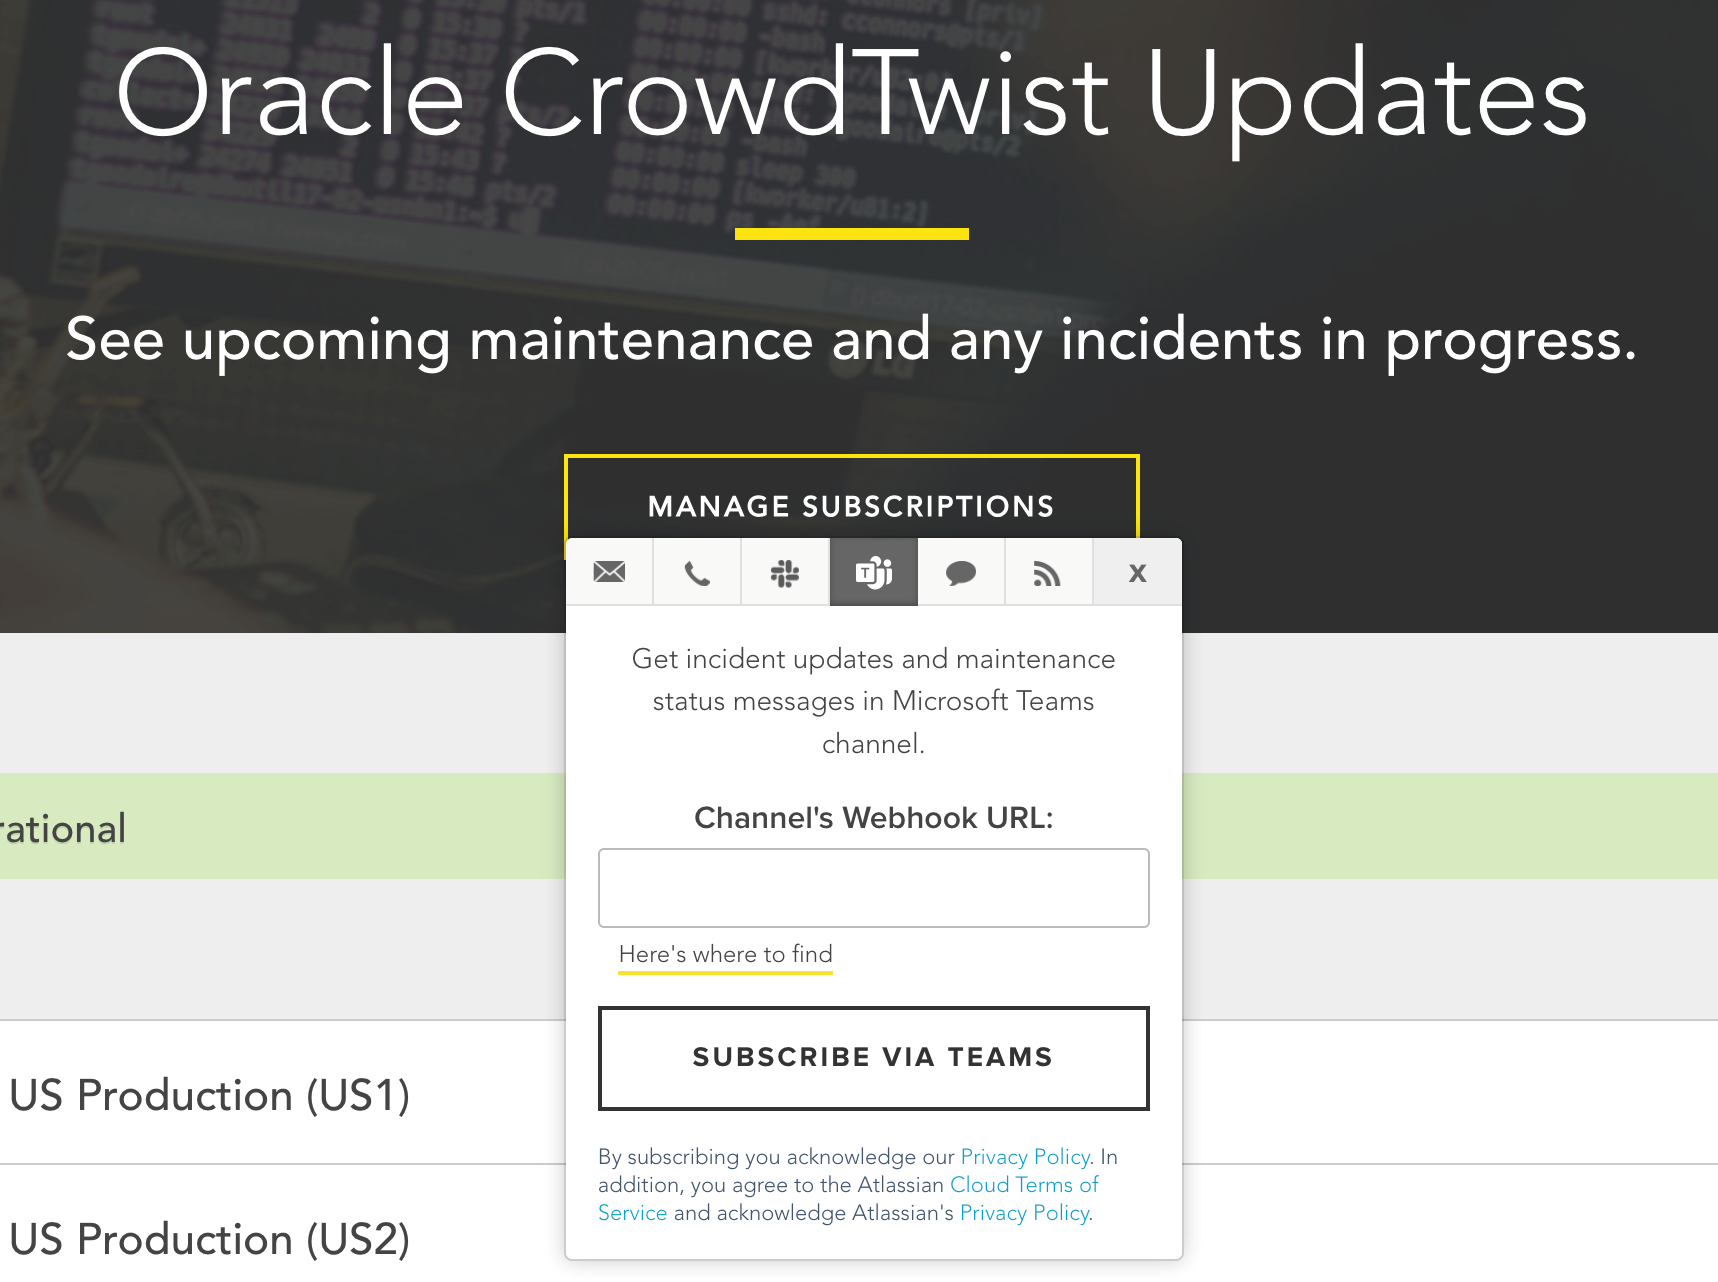 This image displays the Oracle CrowdTwist Updates subscription window for Microsoft Teams.